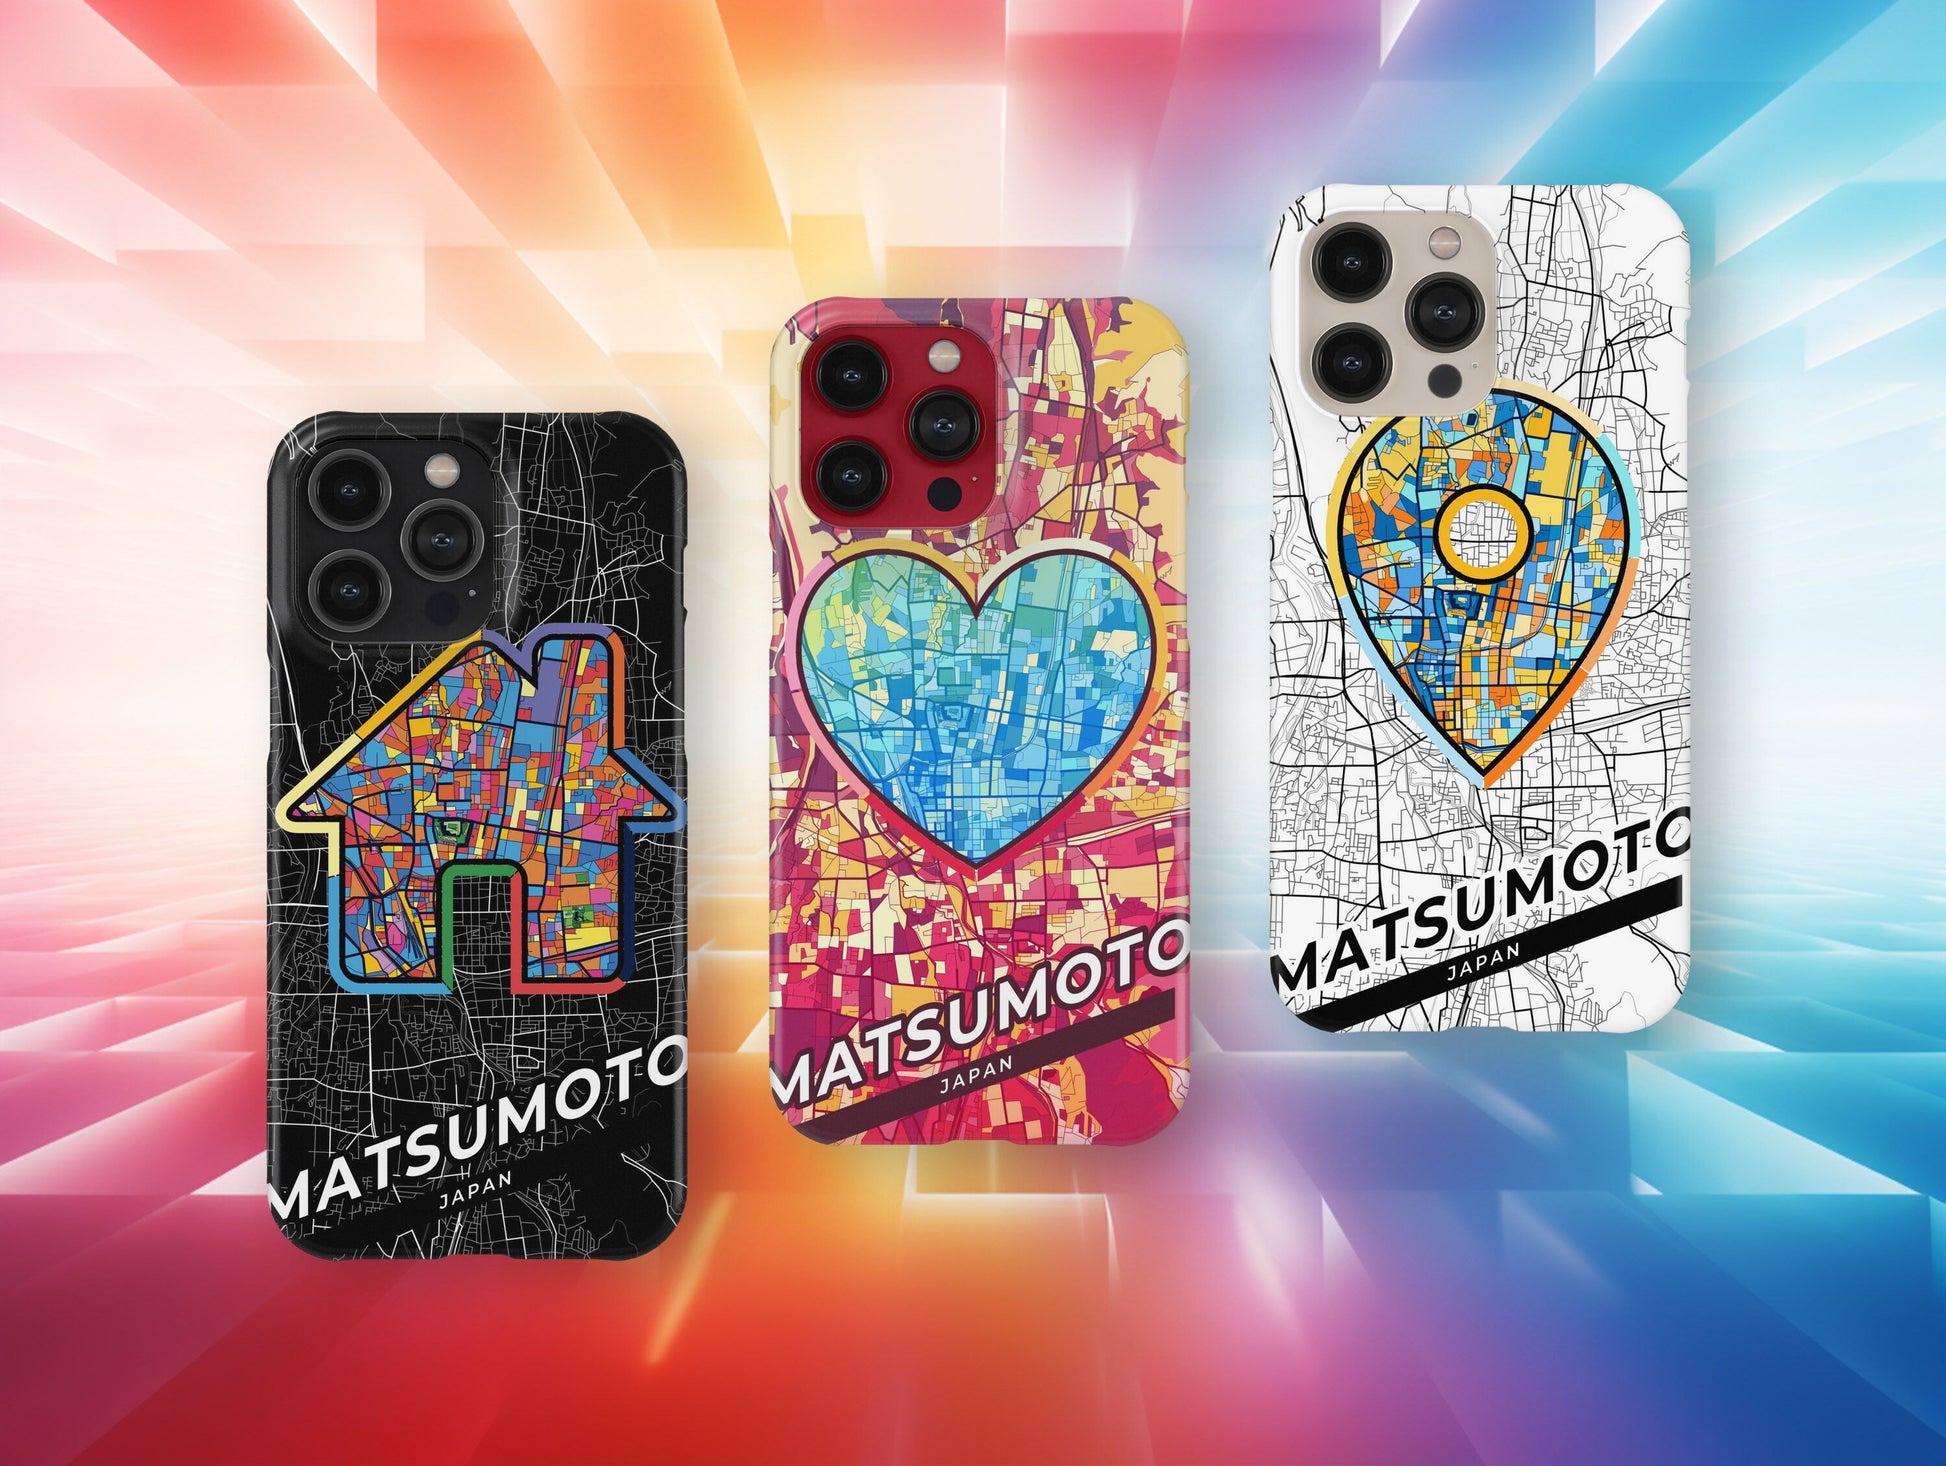 Matsumoto Japan slim phone case with colorful icon. Birthday, wedding or housewarming gift. Couple match cases.